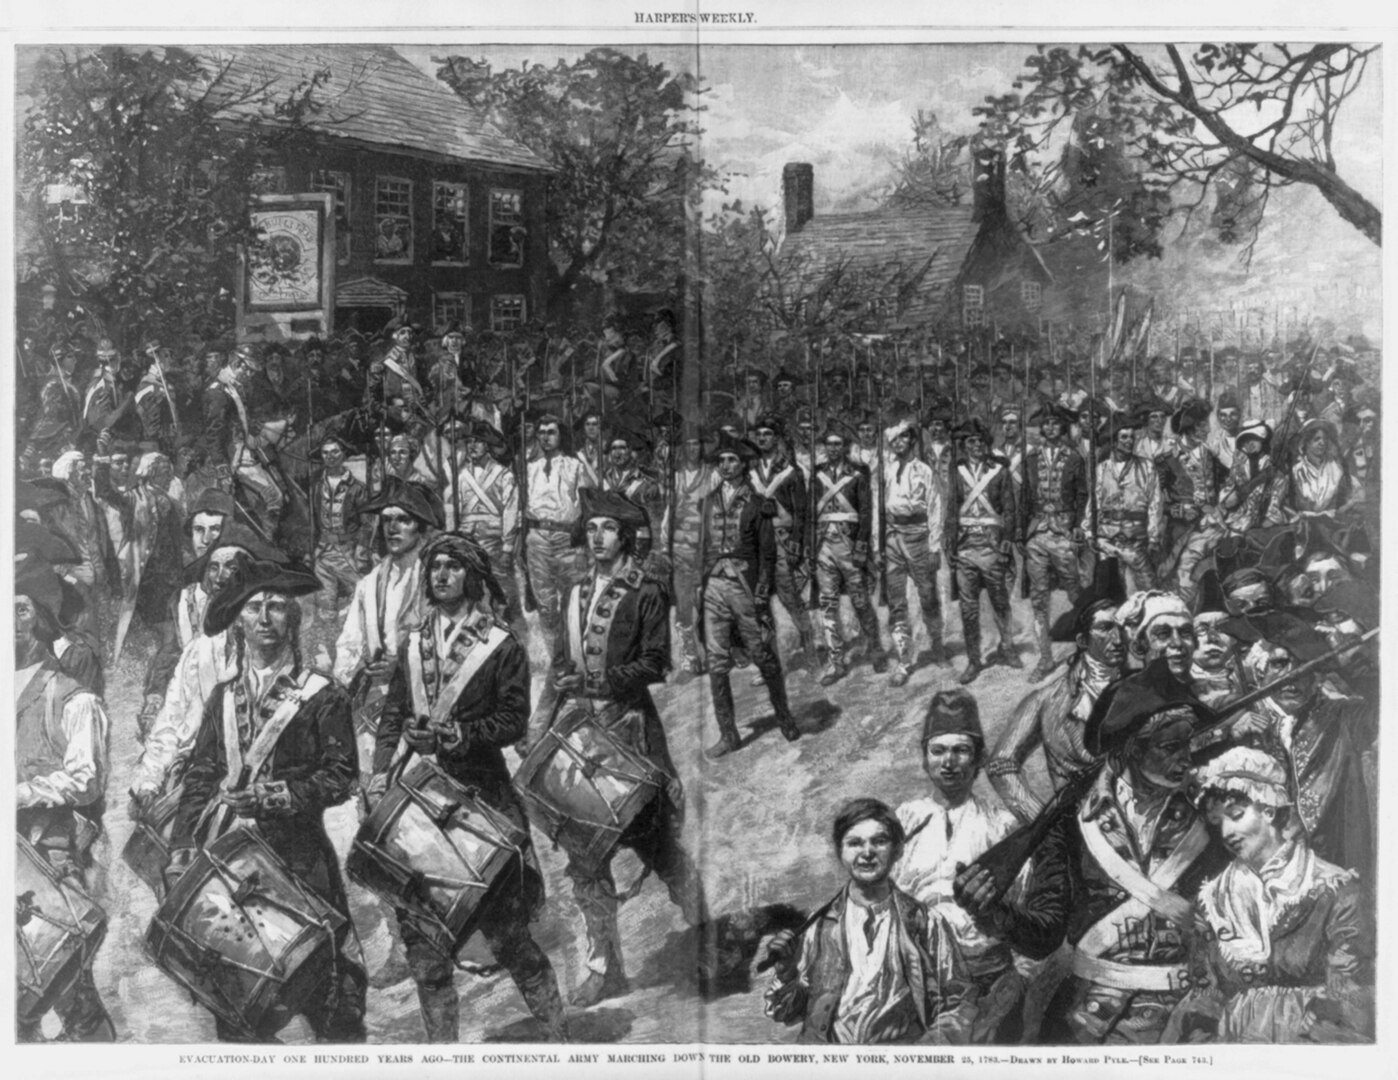 Howard Pyle drawing of the Continental Army marching down the Old Bowery, New York, Nov. 25, 1783.